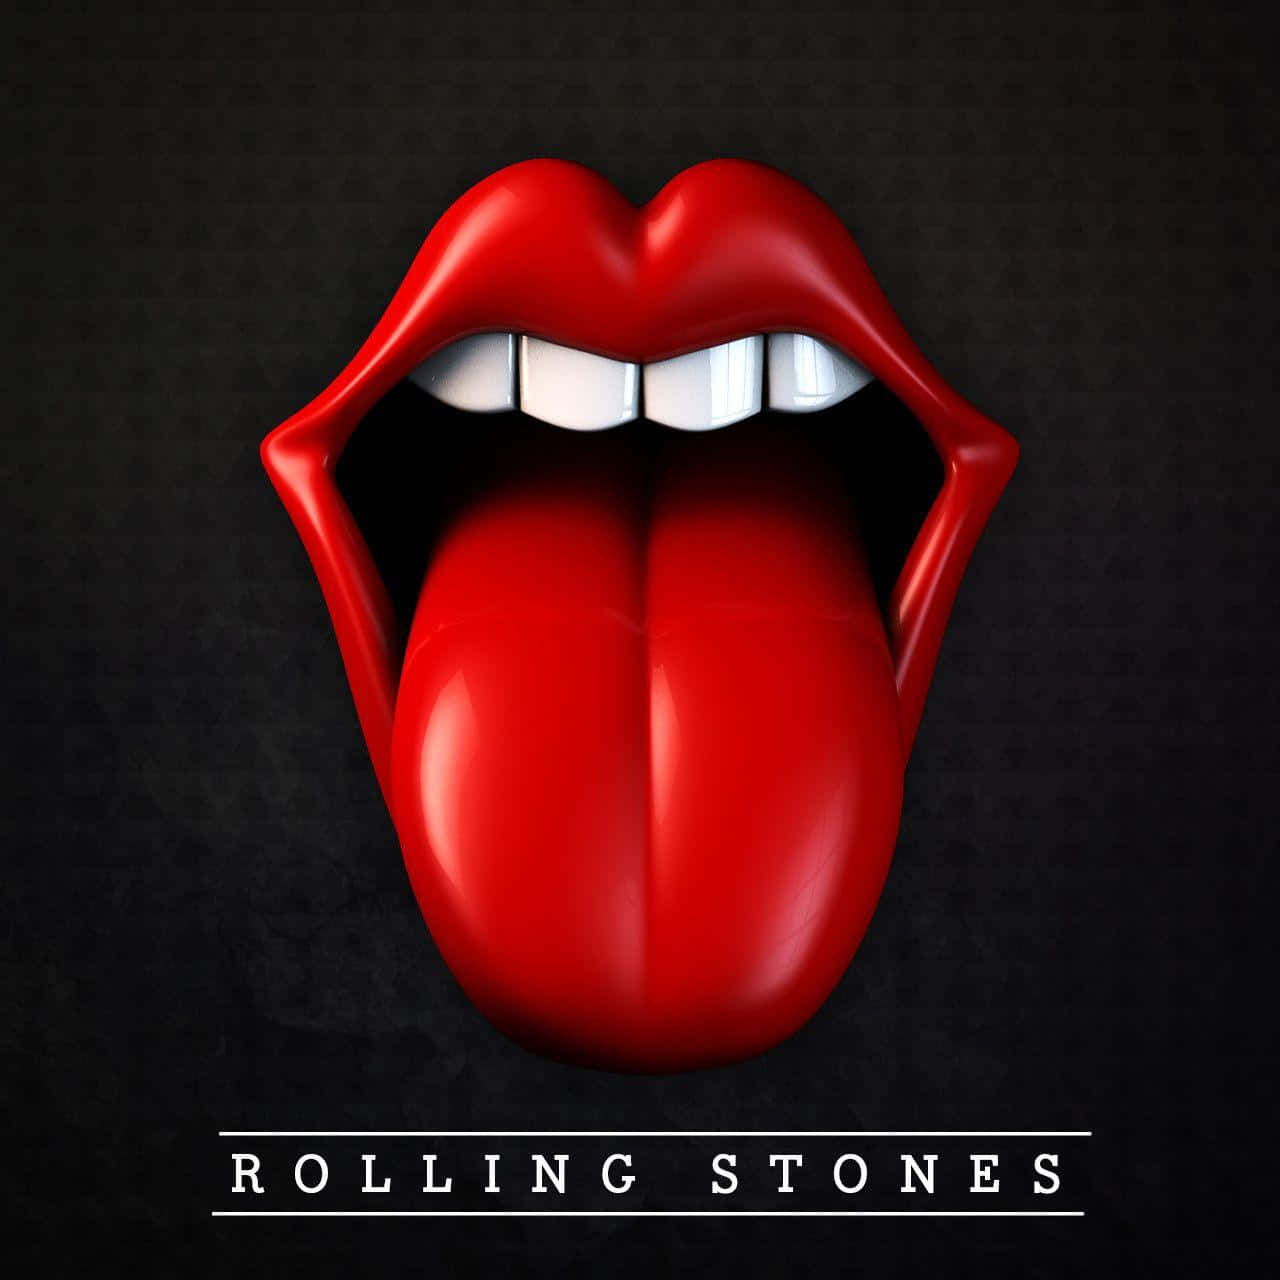 Rolling Stones Logo Tongue Out Wallpaper